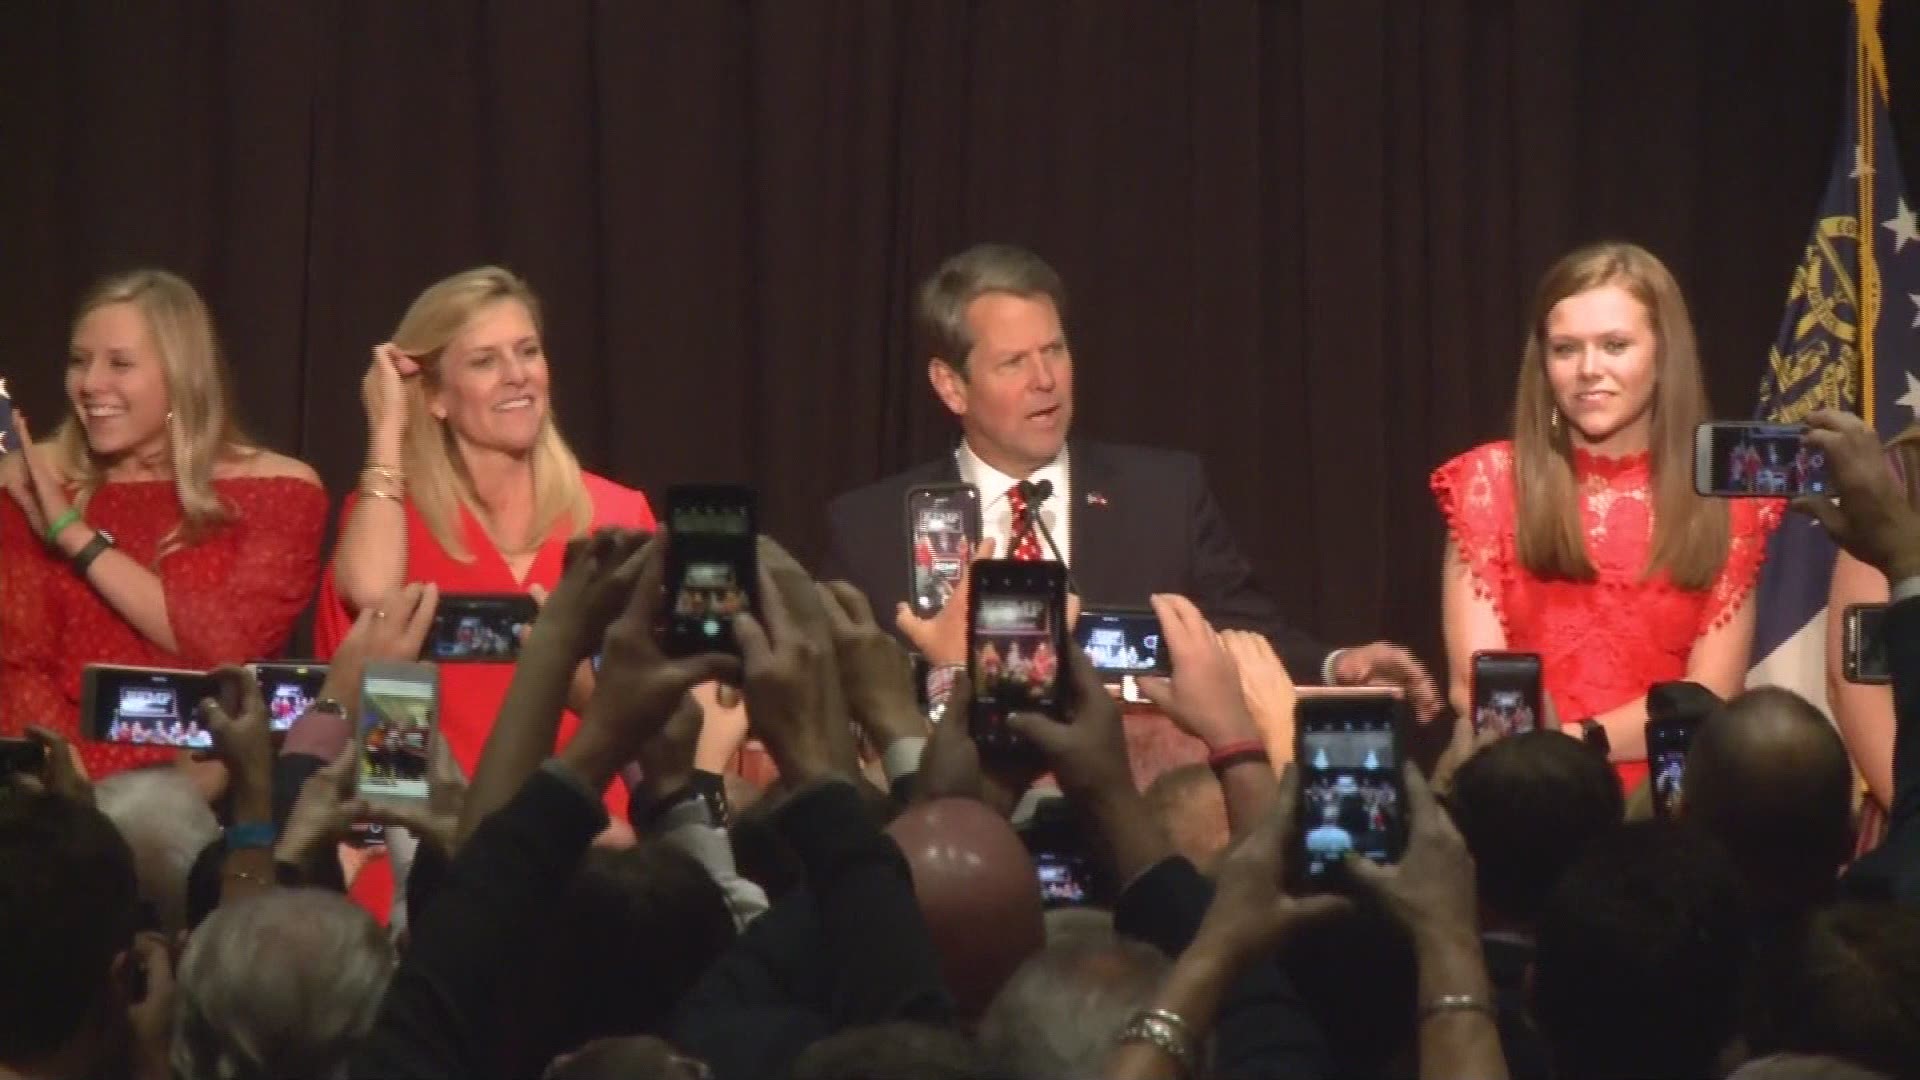 Brian Kemp addresses supporters, confident about victory